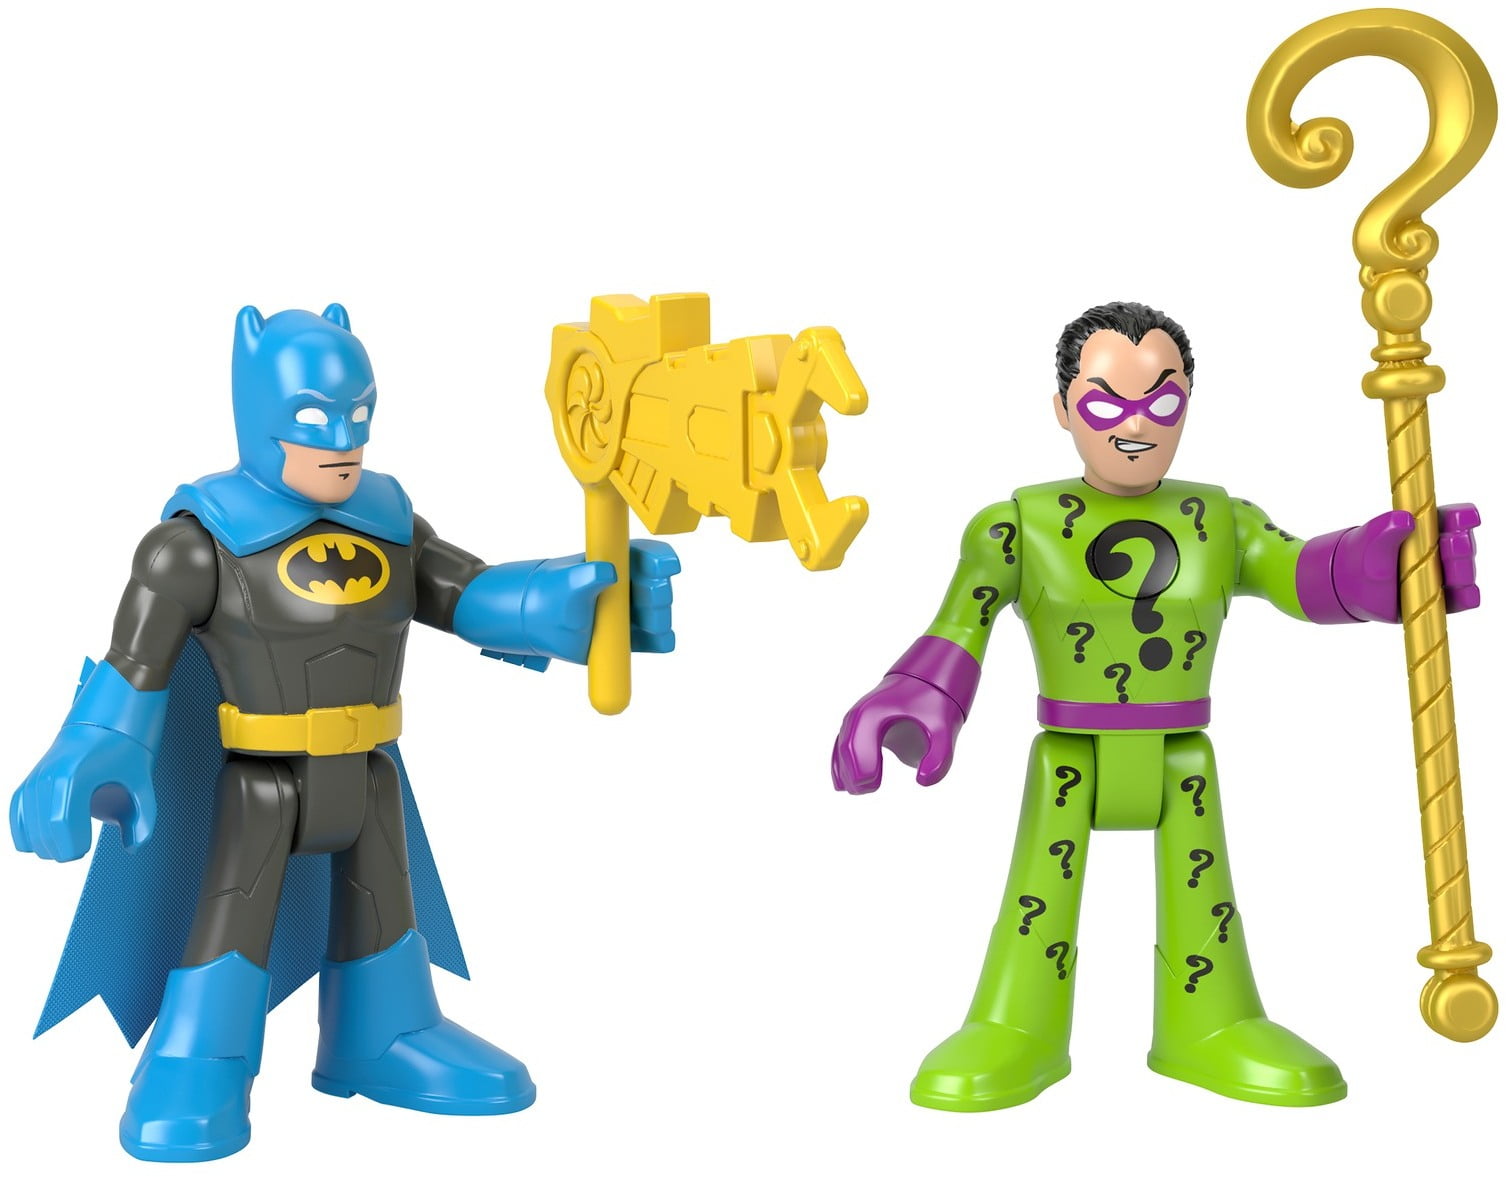 Fisher-Price Imaginext DC Super Friends Riddler Launcher 